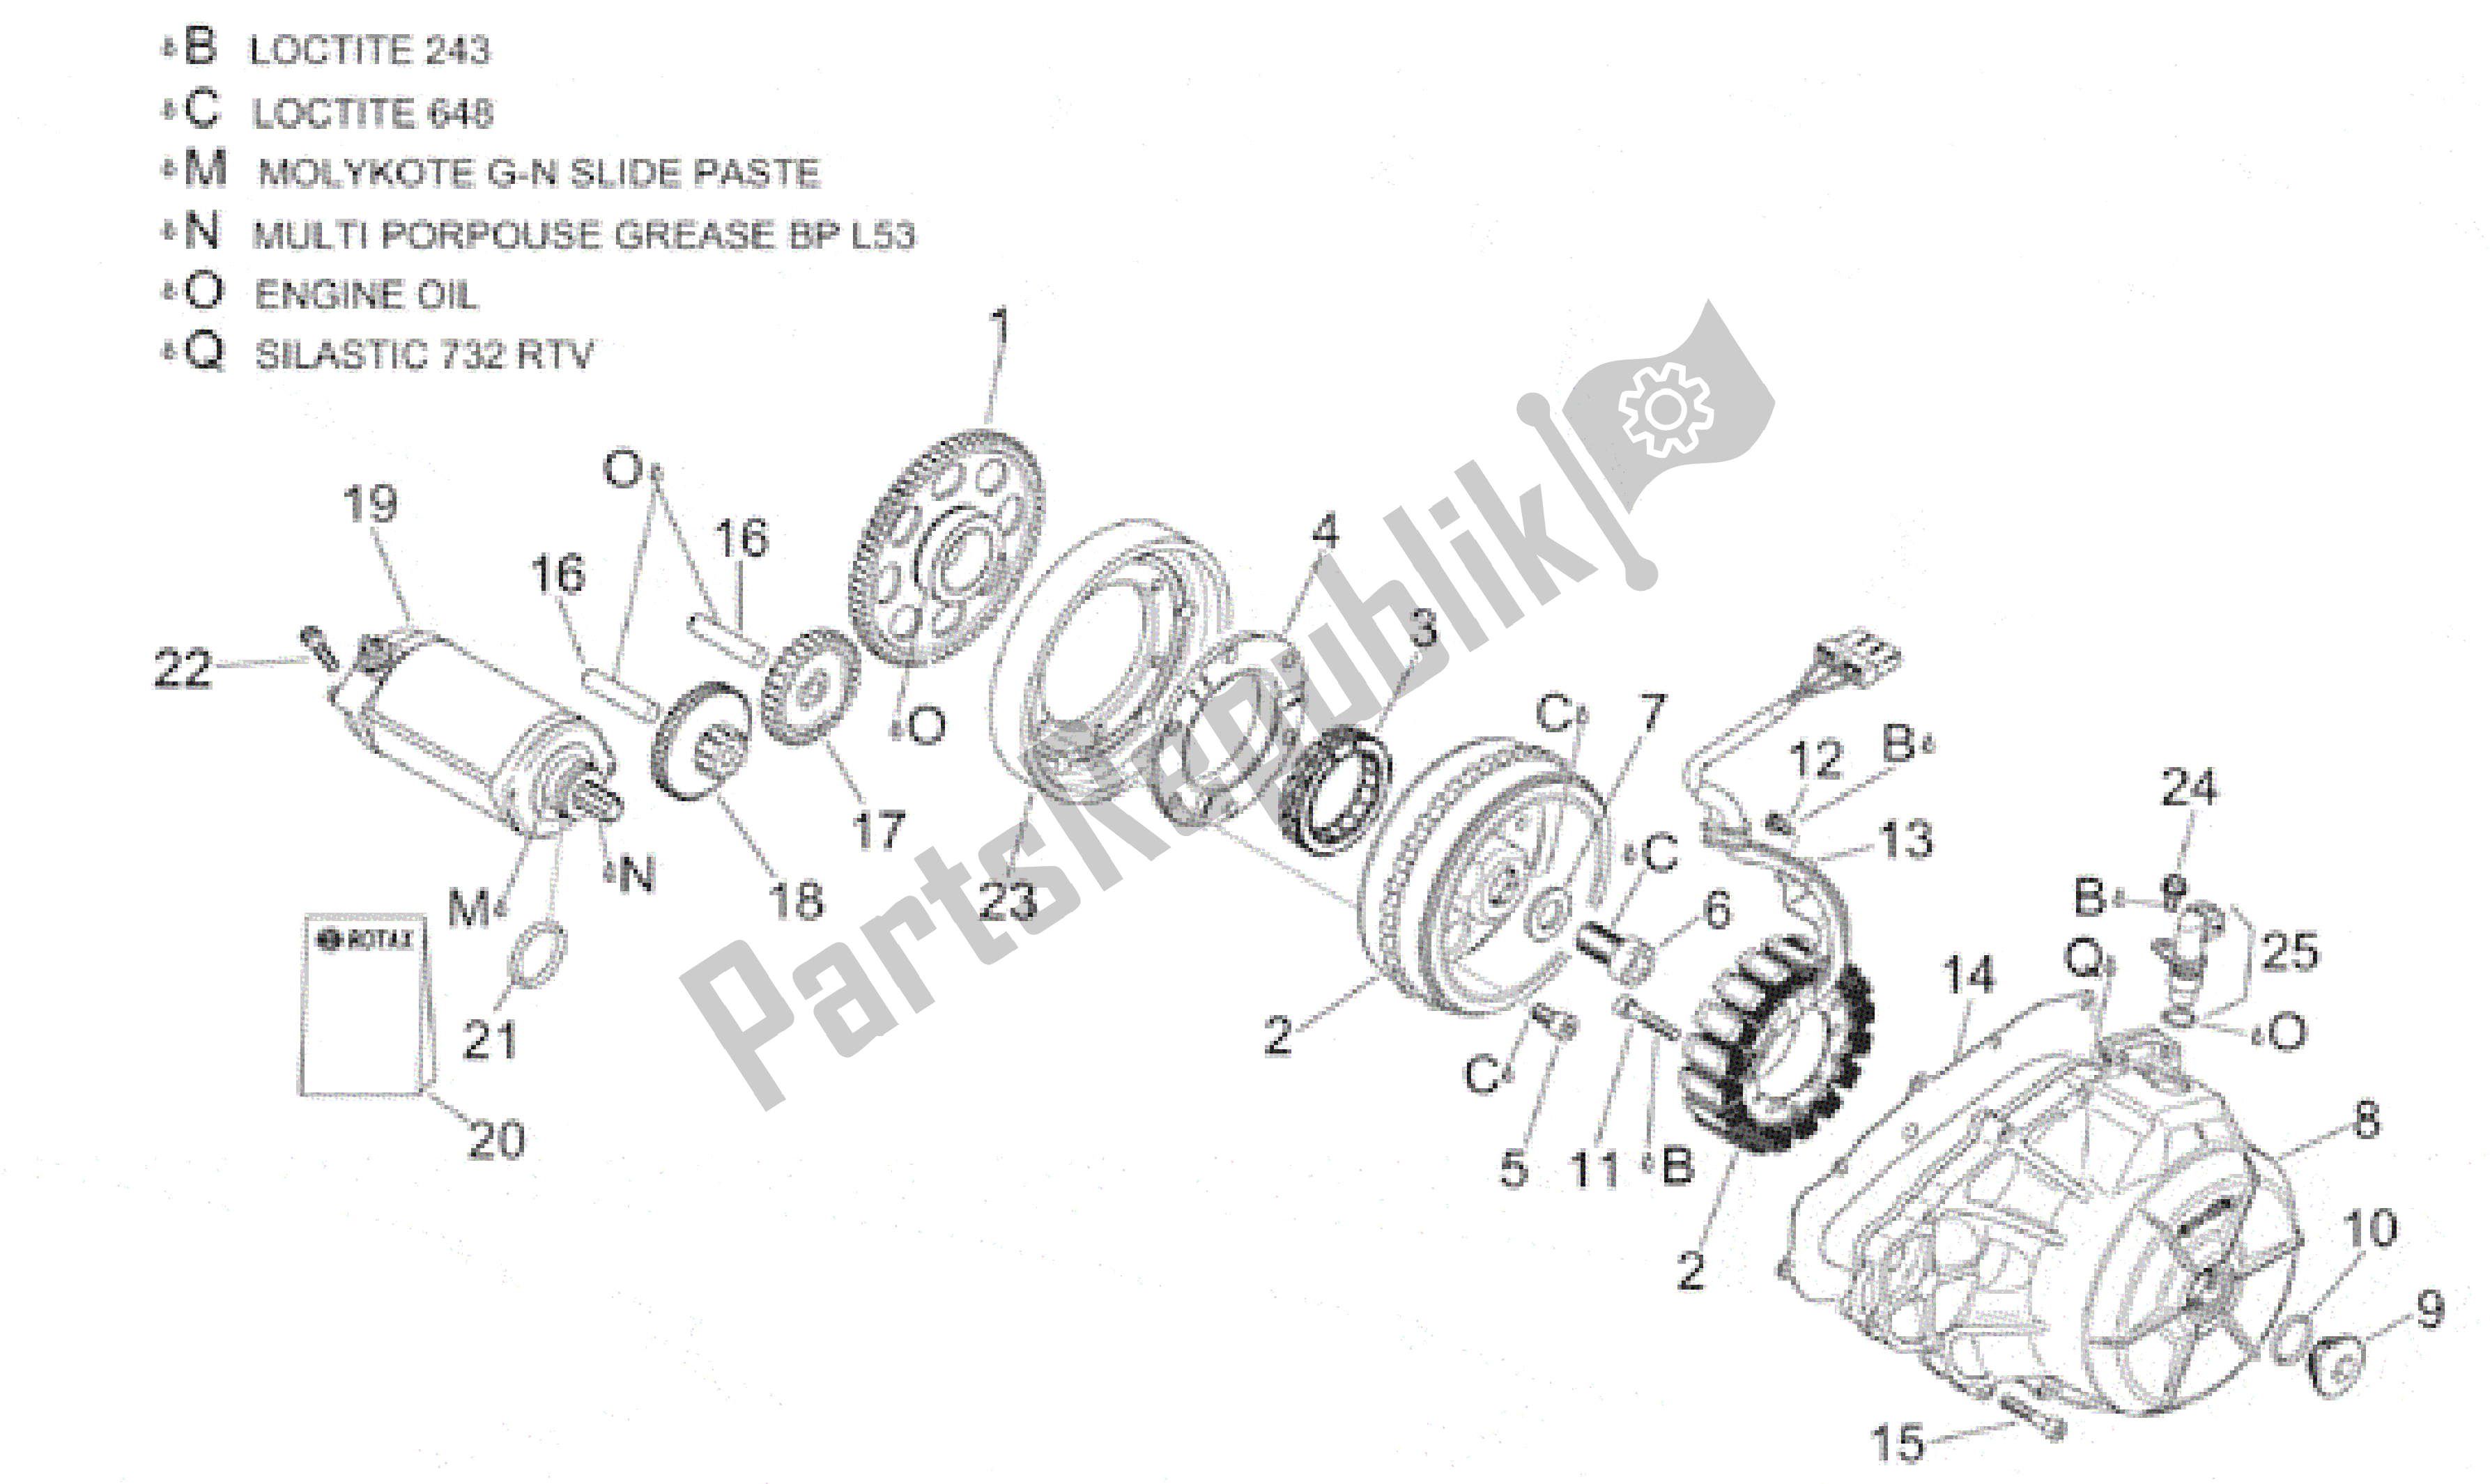 All parts for the Ignition Unit of the Aprilia RST 1000 2001